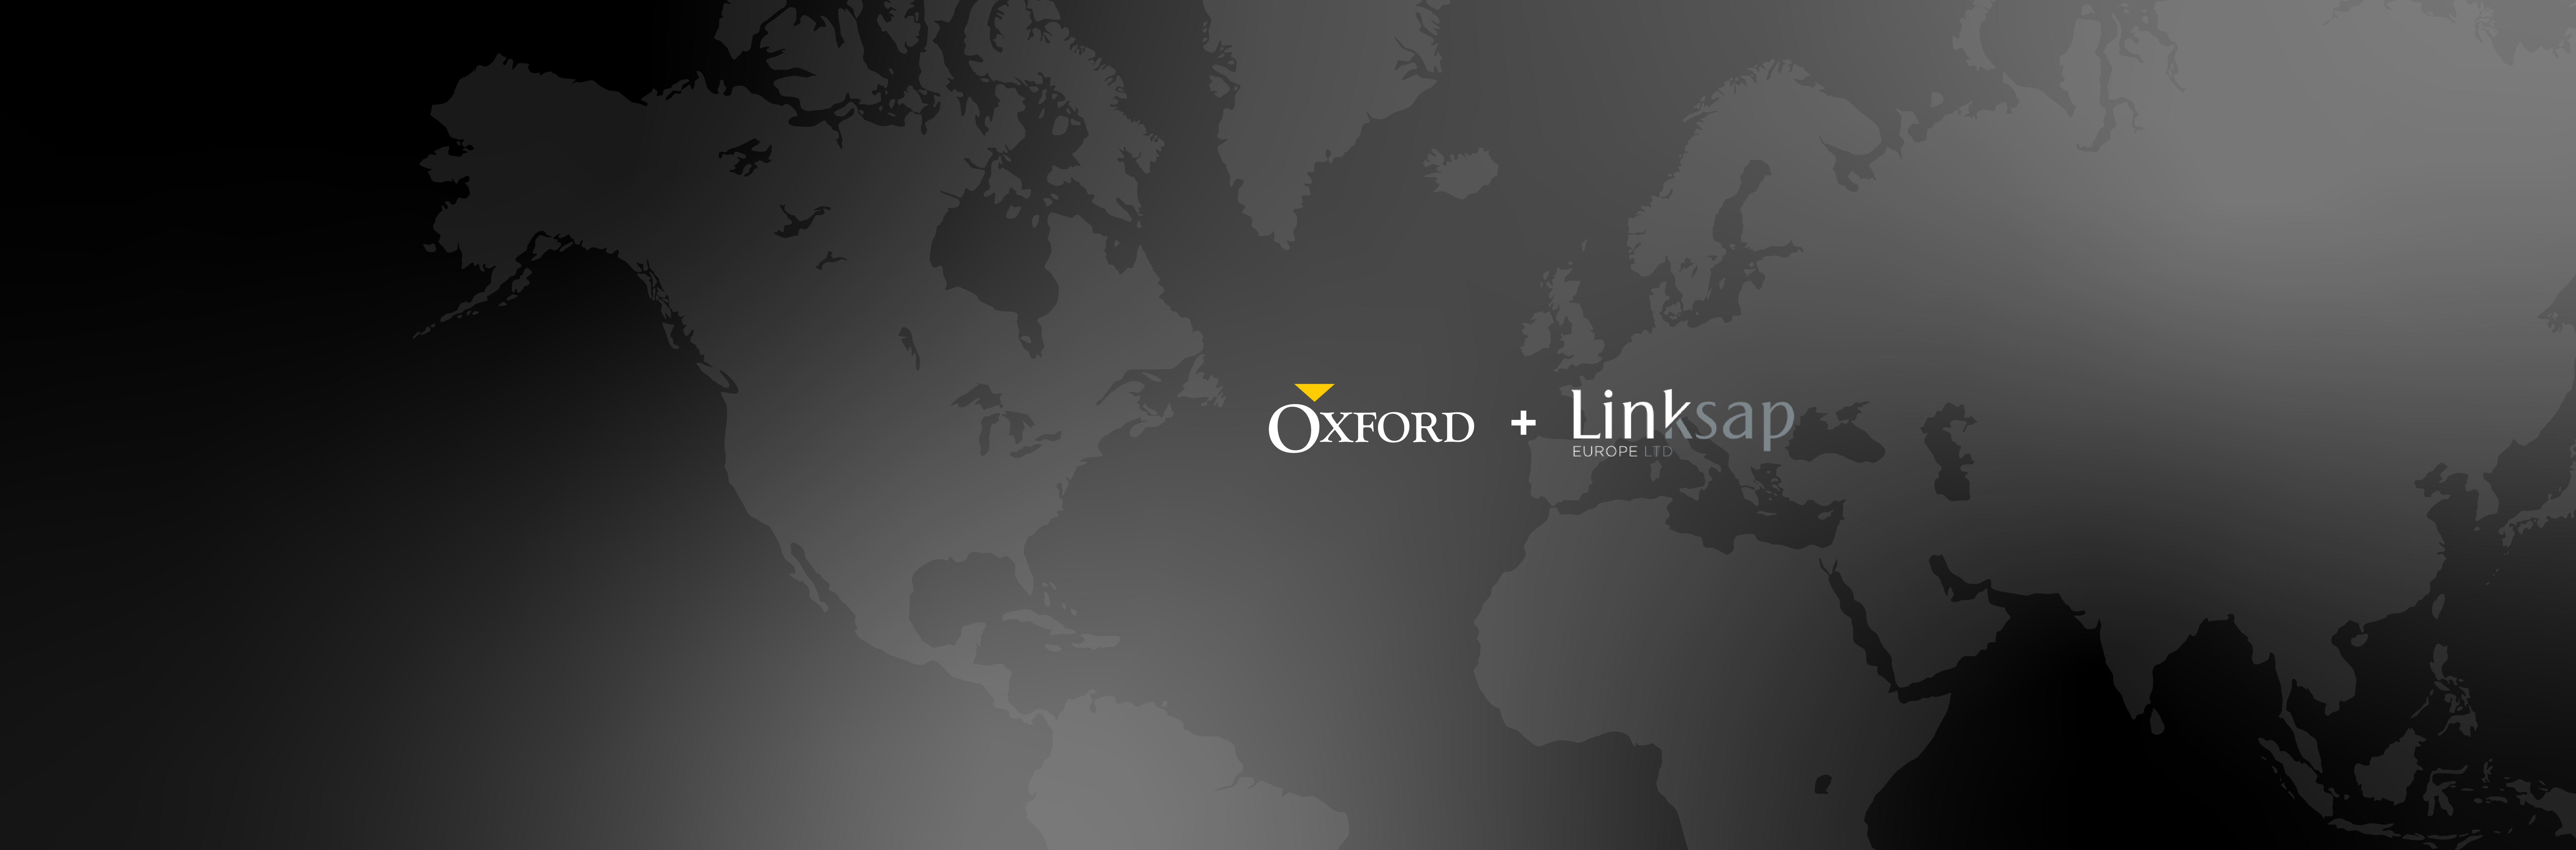 Oxford Global Resources has expanded its SAP expertise through the strategic acquisition of LinkSAP, enhancing its ability to deliver specialized technology solutions.